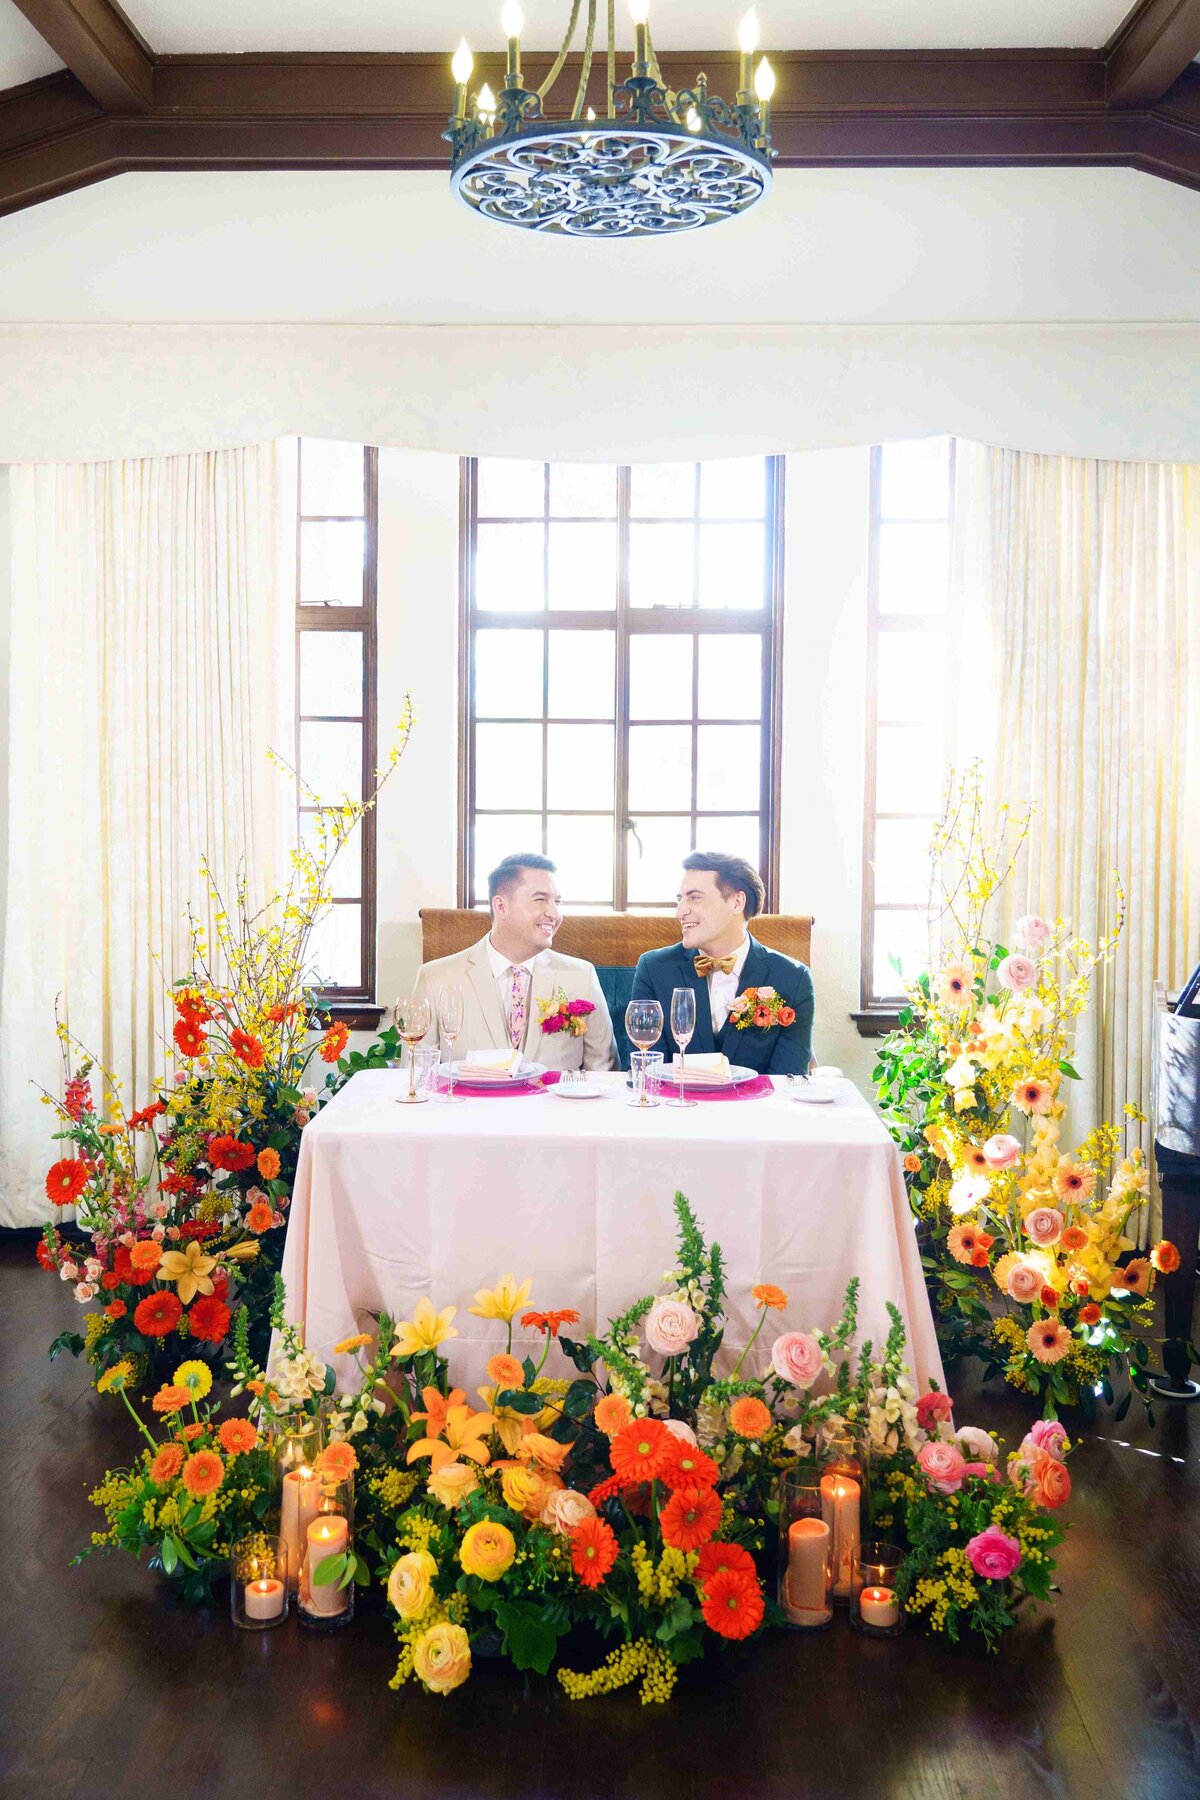 Two grooms at their sweetheart table surrounded by colorful flowers at The Ebell Santa Ana